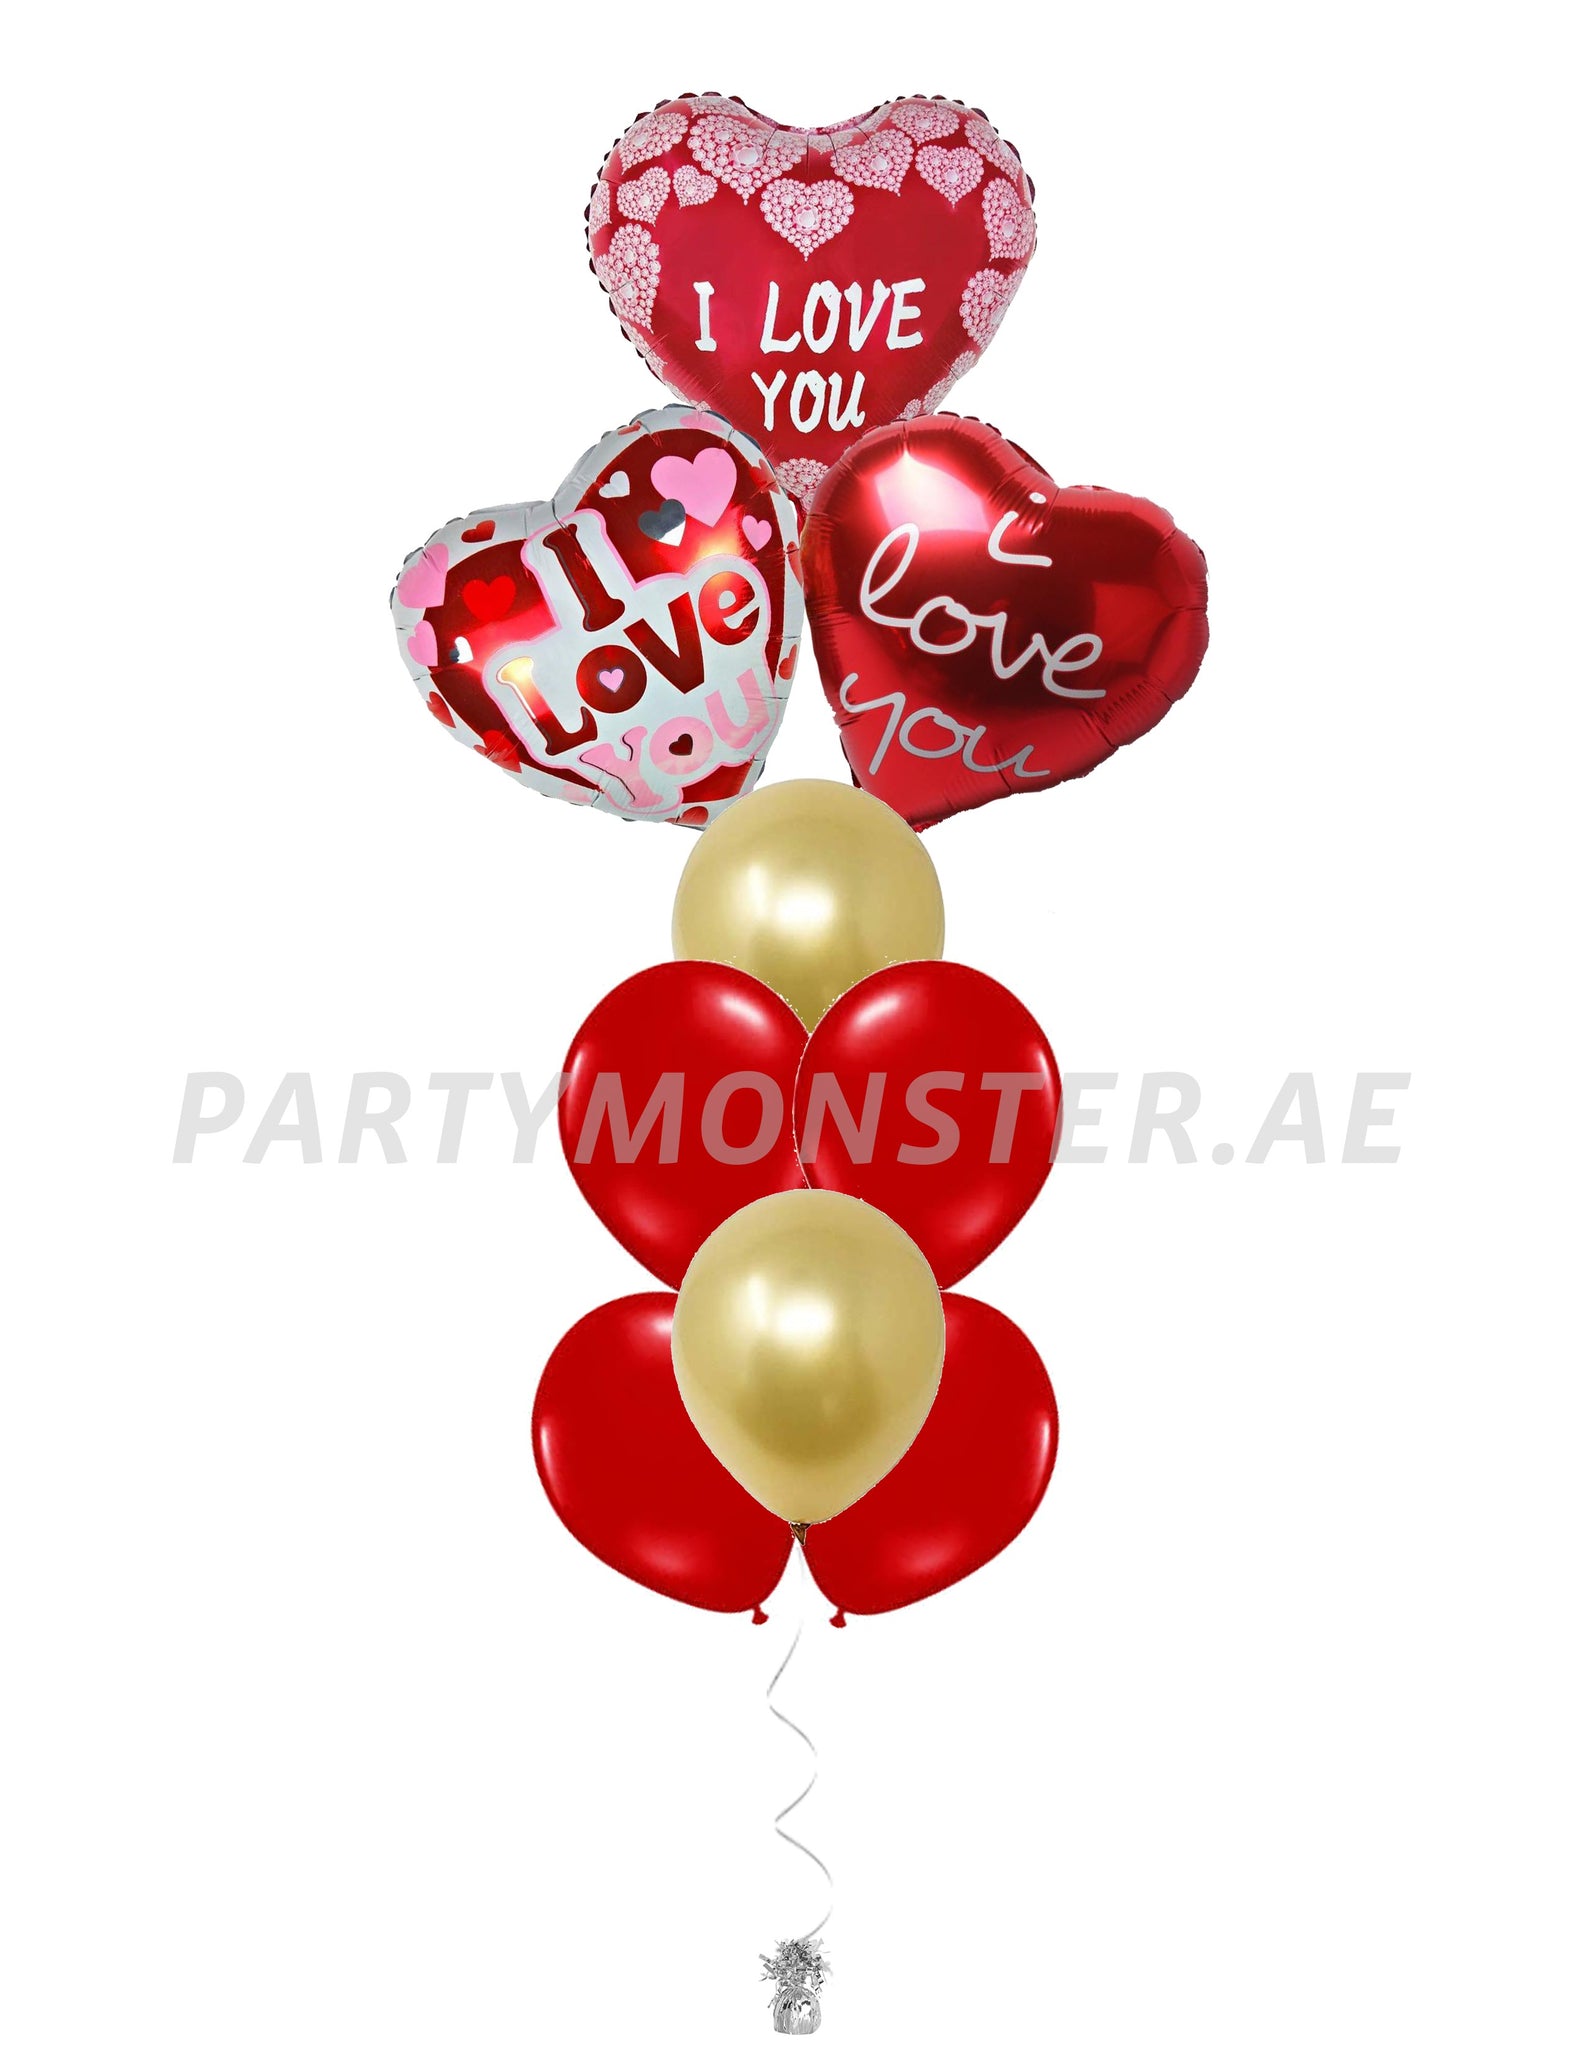 I Love You foil balloons bouquet 1 - PartyMonster.ae